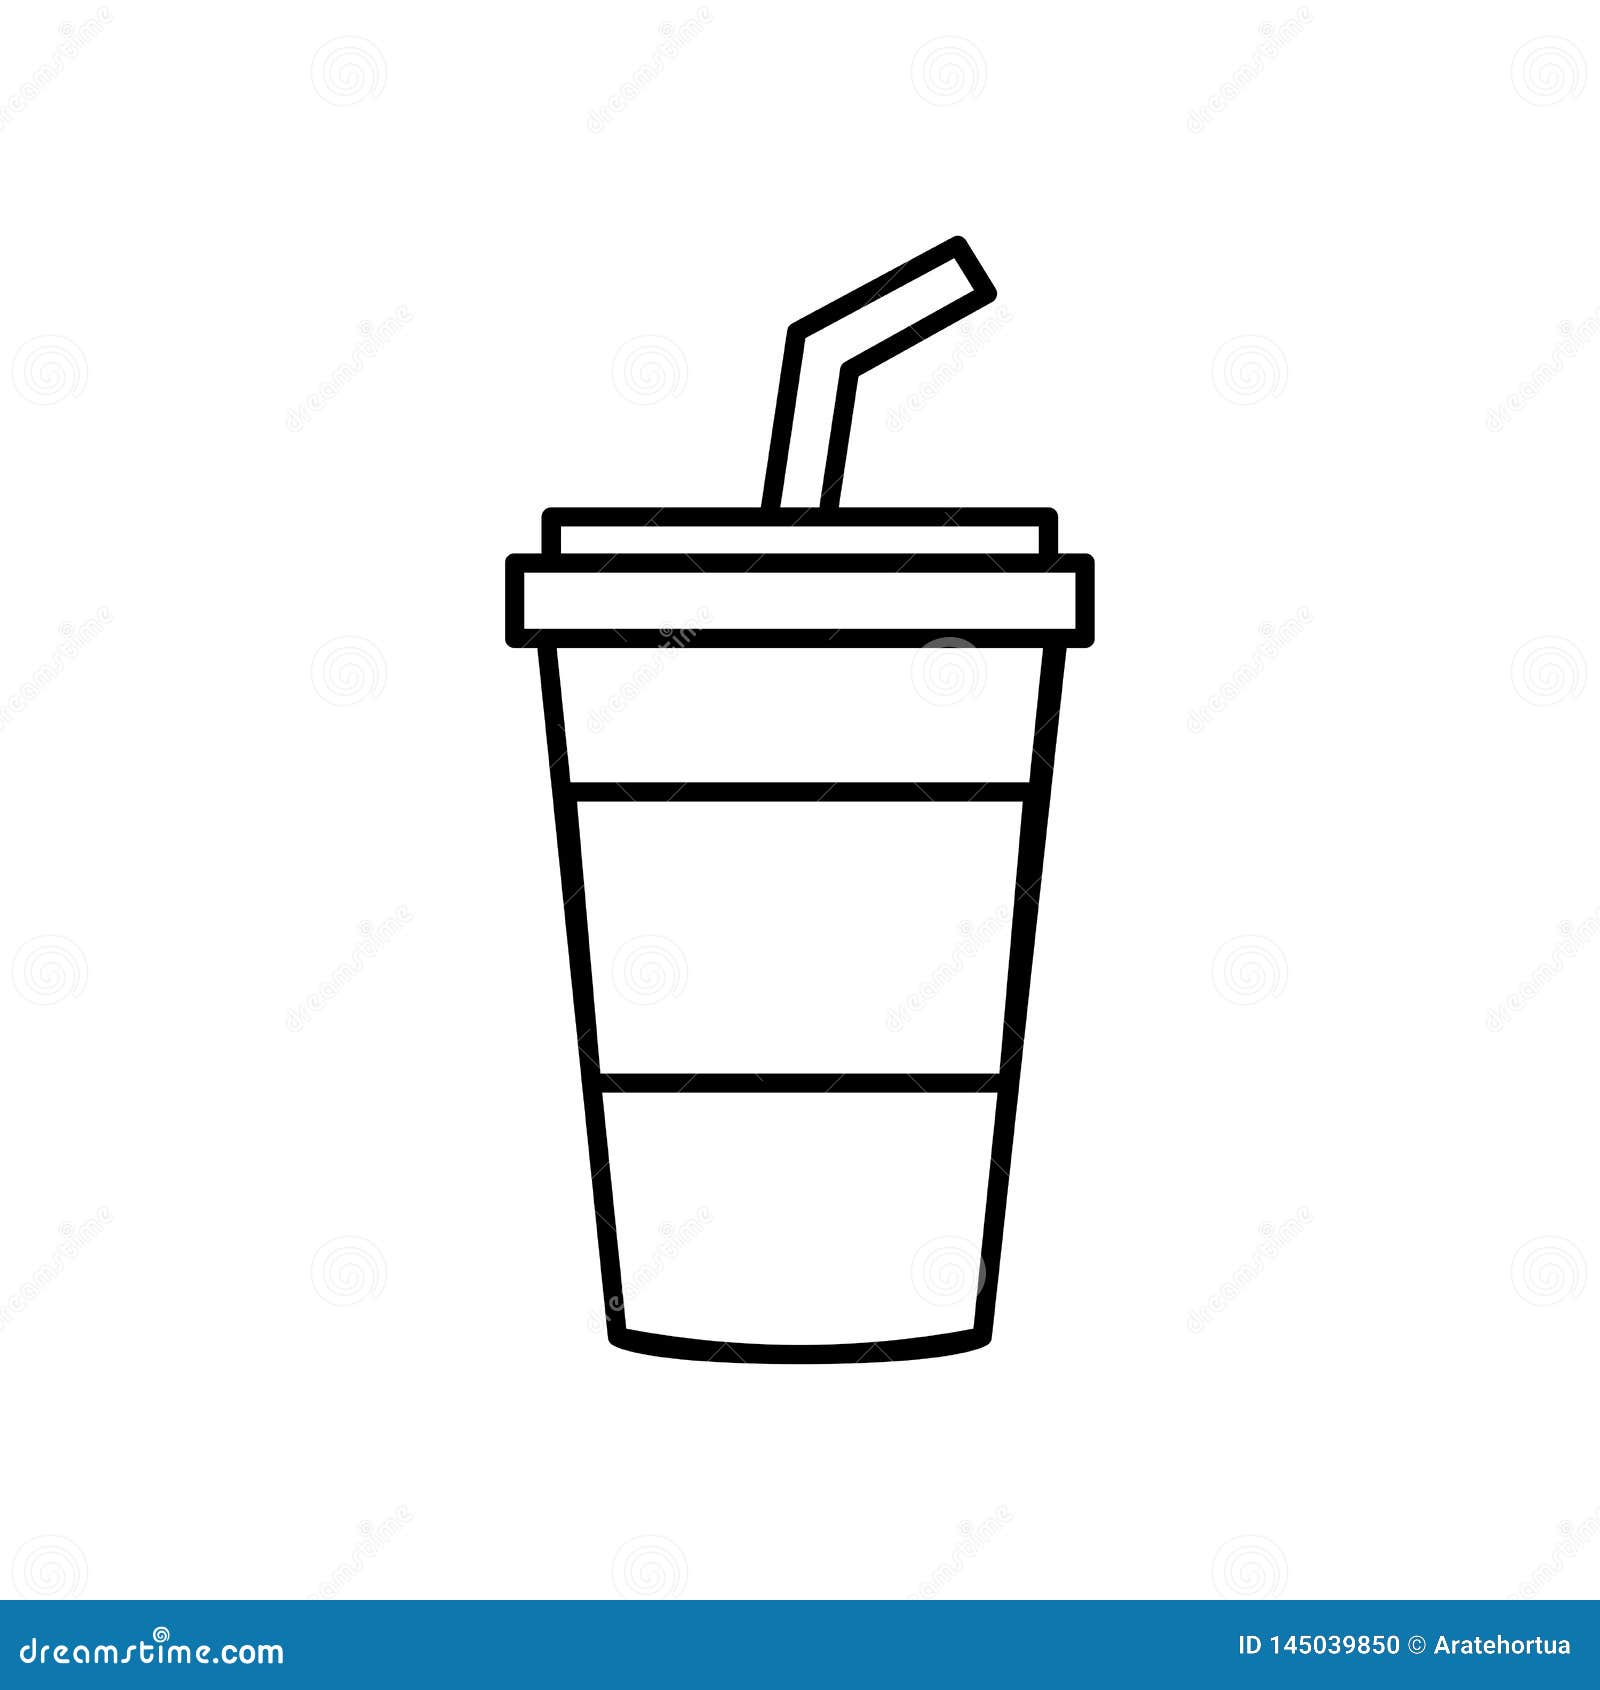 21,400+ Soda Cup Stock Illustrations, Royalty-Free Vector Graphics